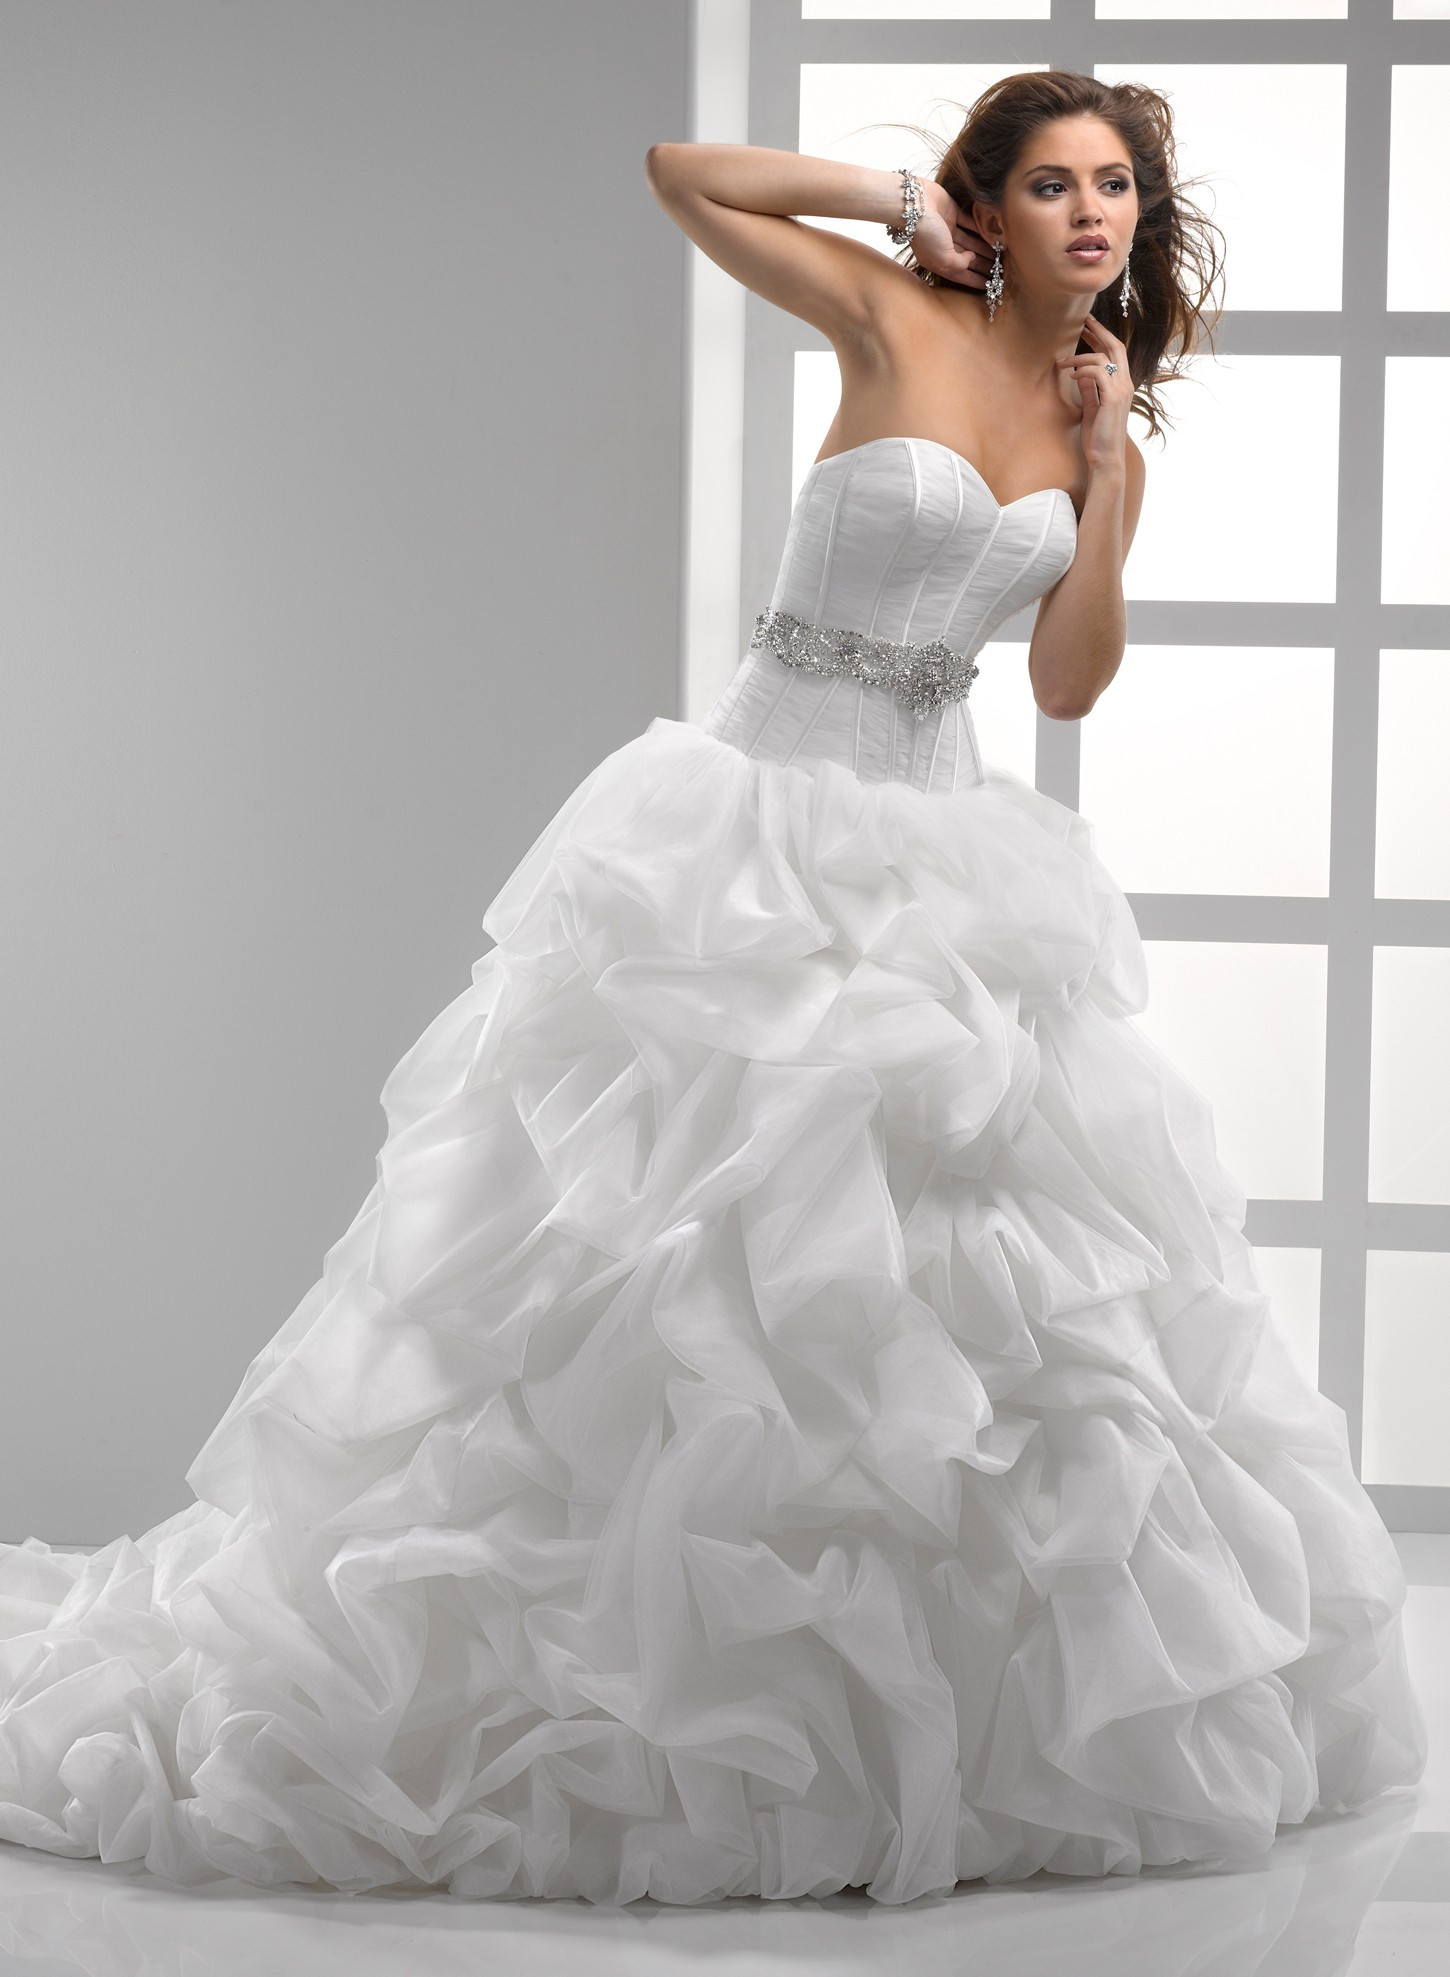 Tulle Ball Gown Wedding Dress
 The Irresistible Attraction of Ball Gown Wedding Dresses